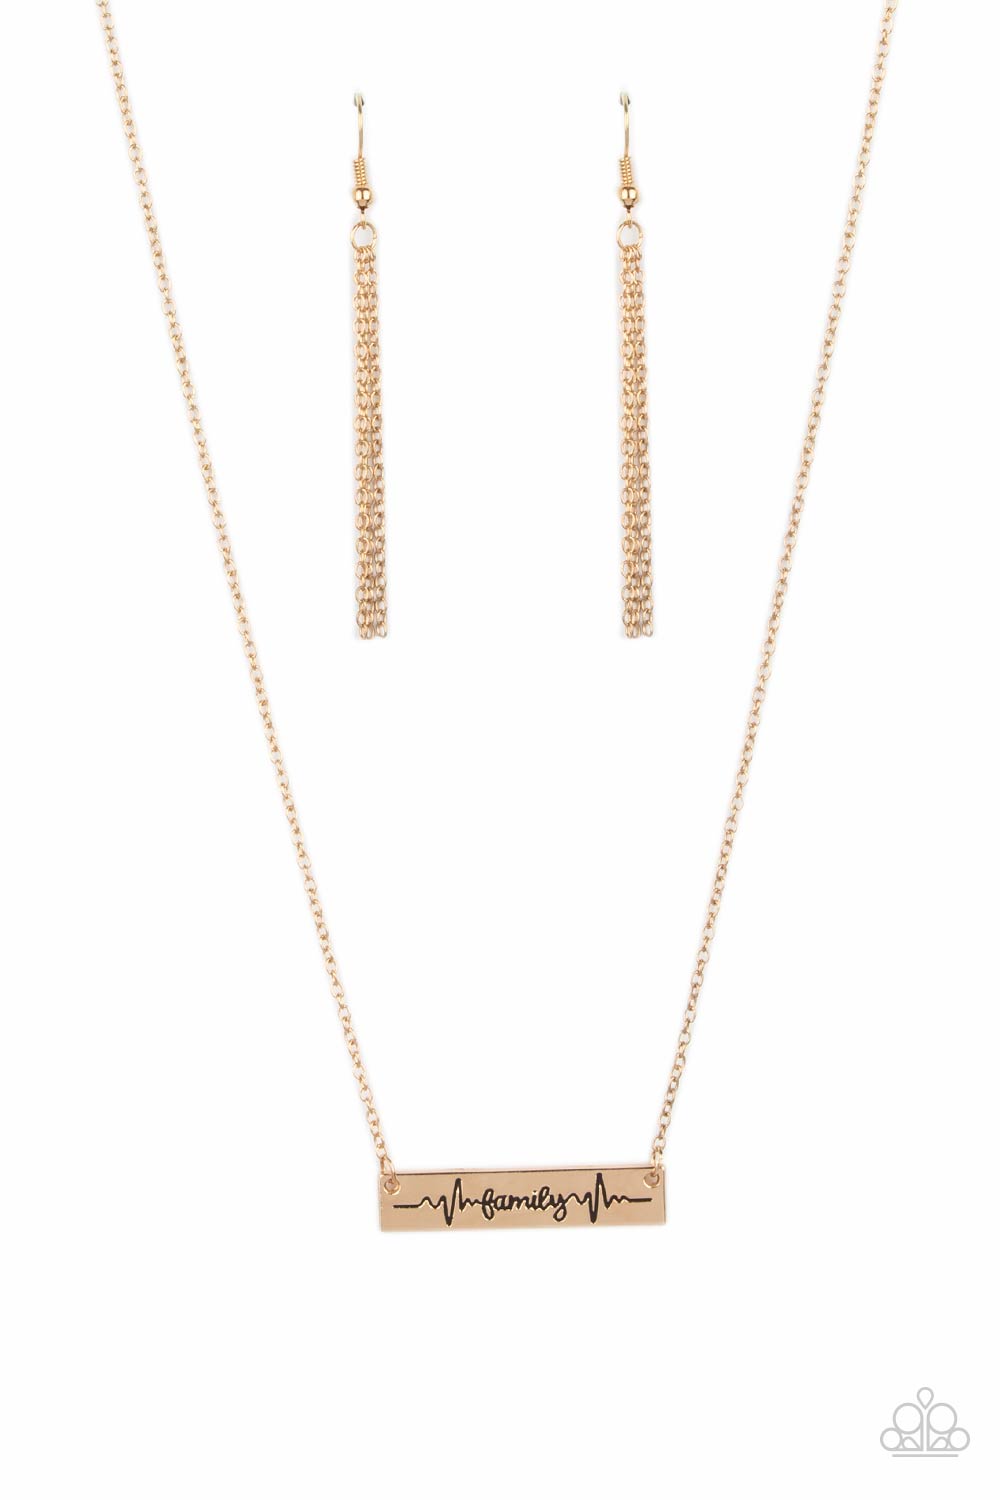 The word "Family," is inscribed between symbolic life lines on a shining rectangular gold plate creating an affectionate keepsake on a dainty gold chain below the collar. Features an adjustable clasp closure.  Sold as one individual necklace. Includes one pair of matching earrings.